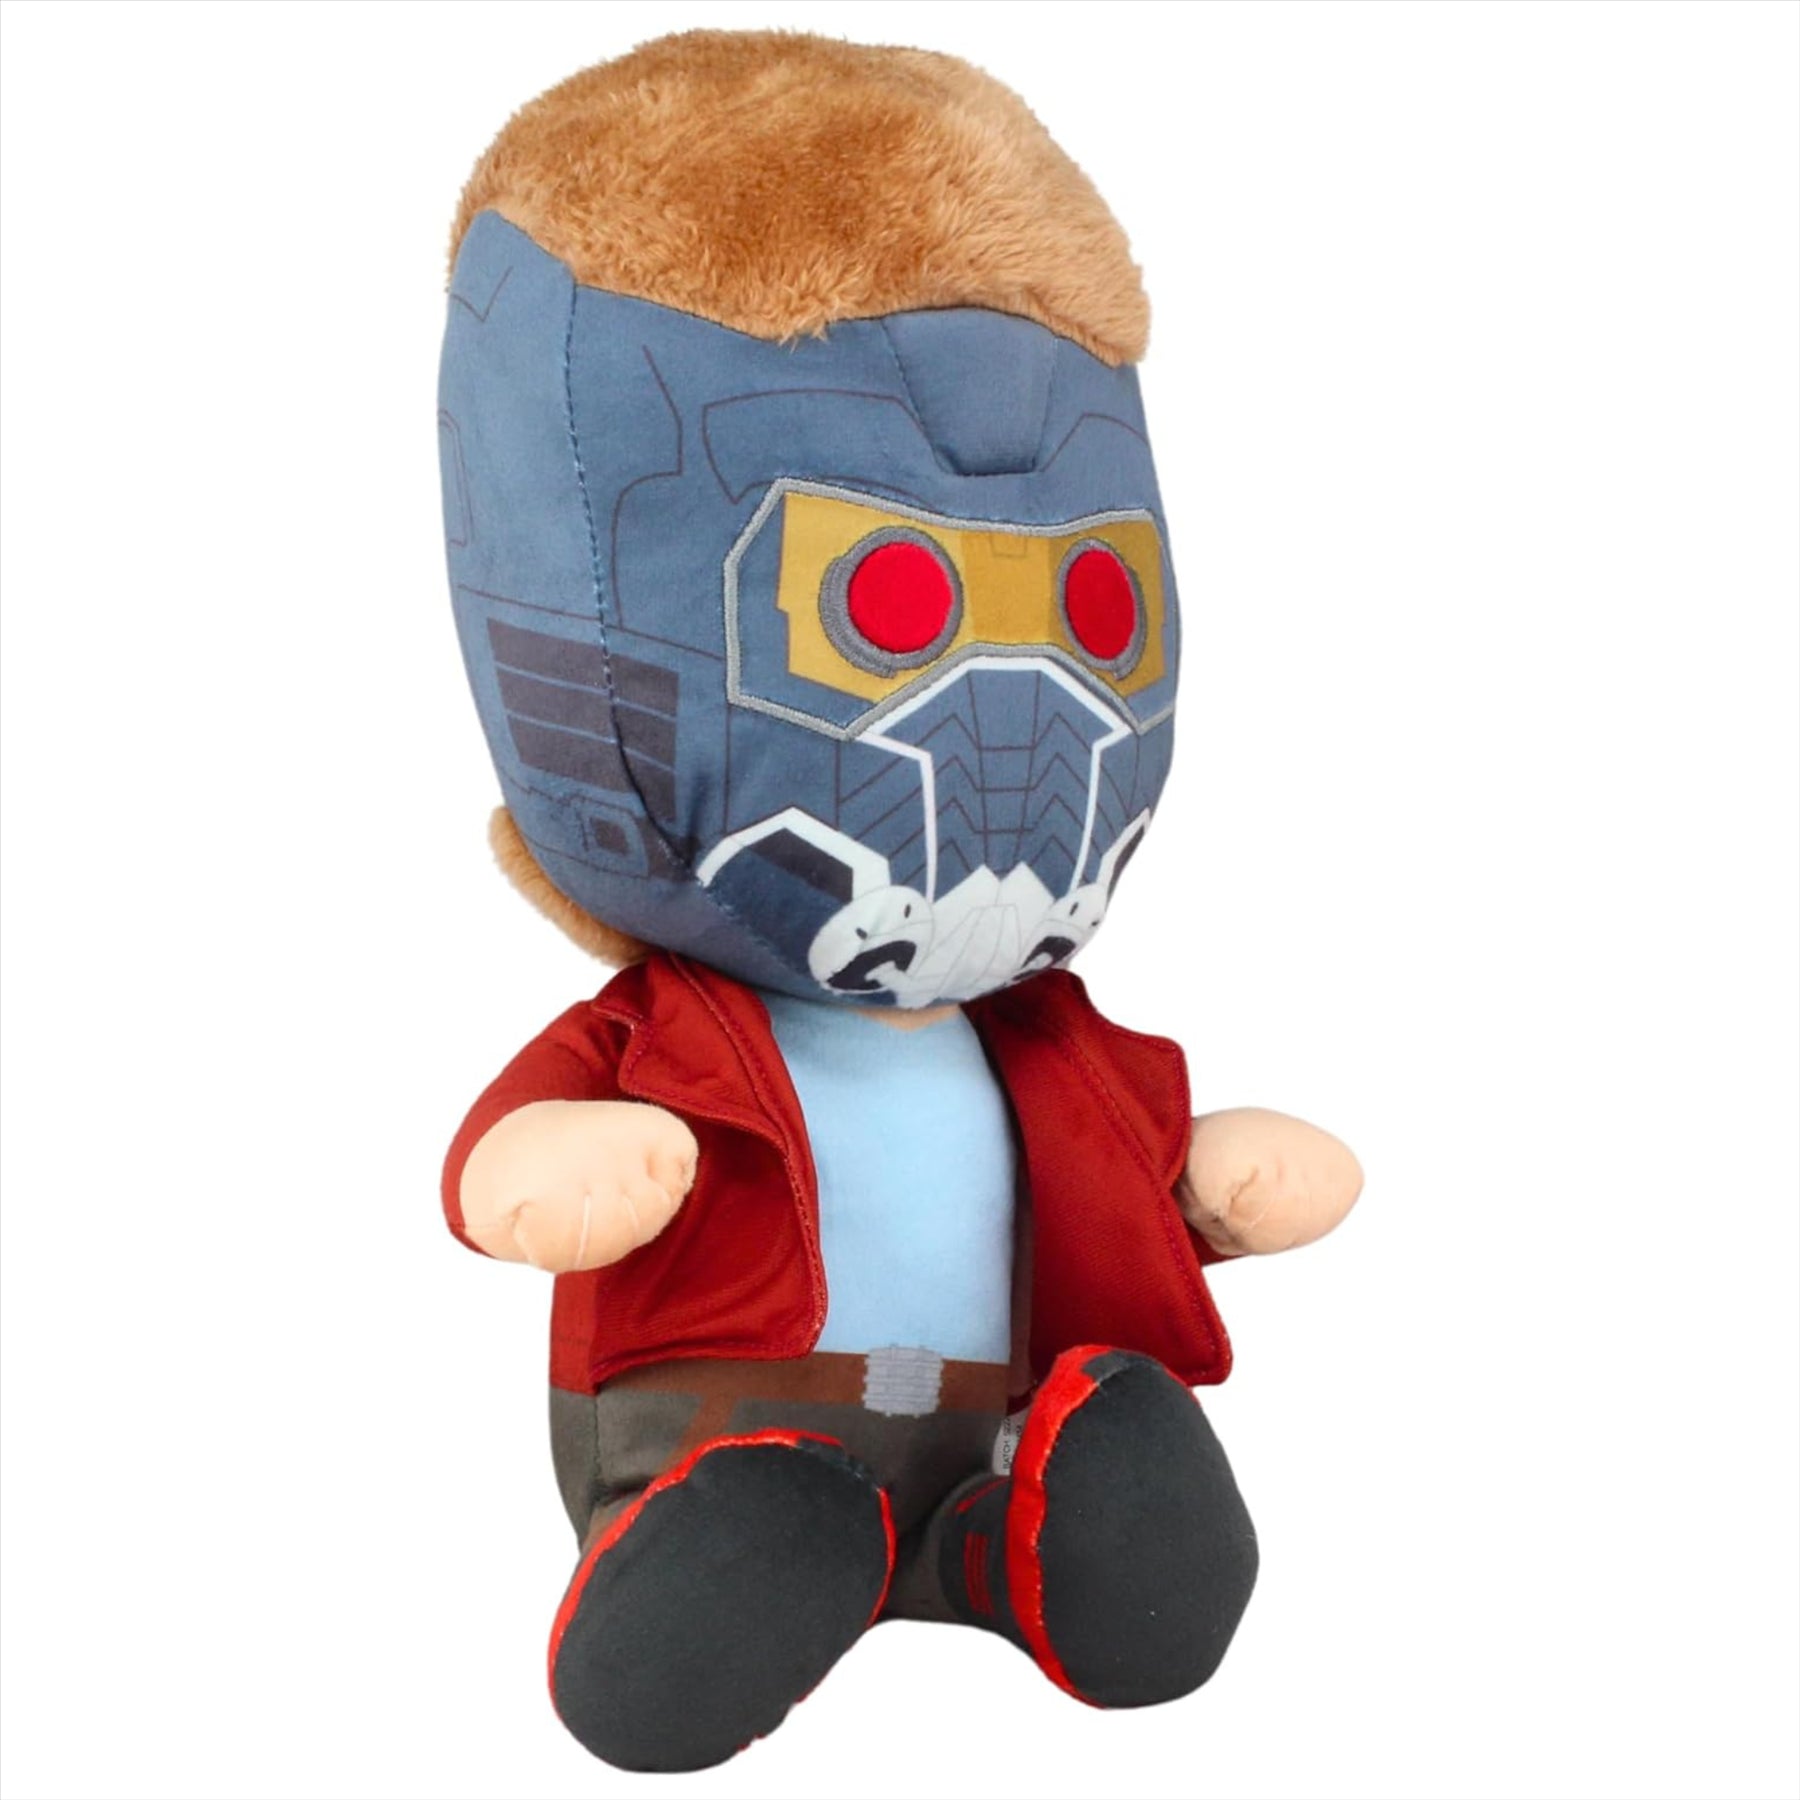 Guardians of the Galaxy Avengers Starlord Super Soft Embroidered 36cm Plush Toy - Toptoys2u